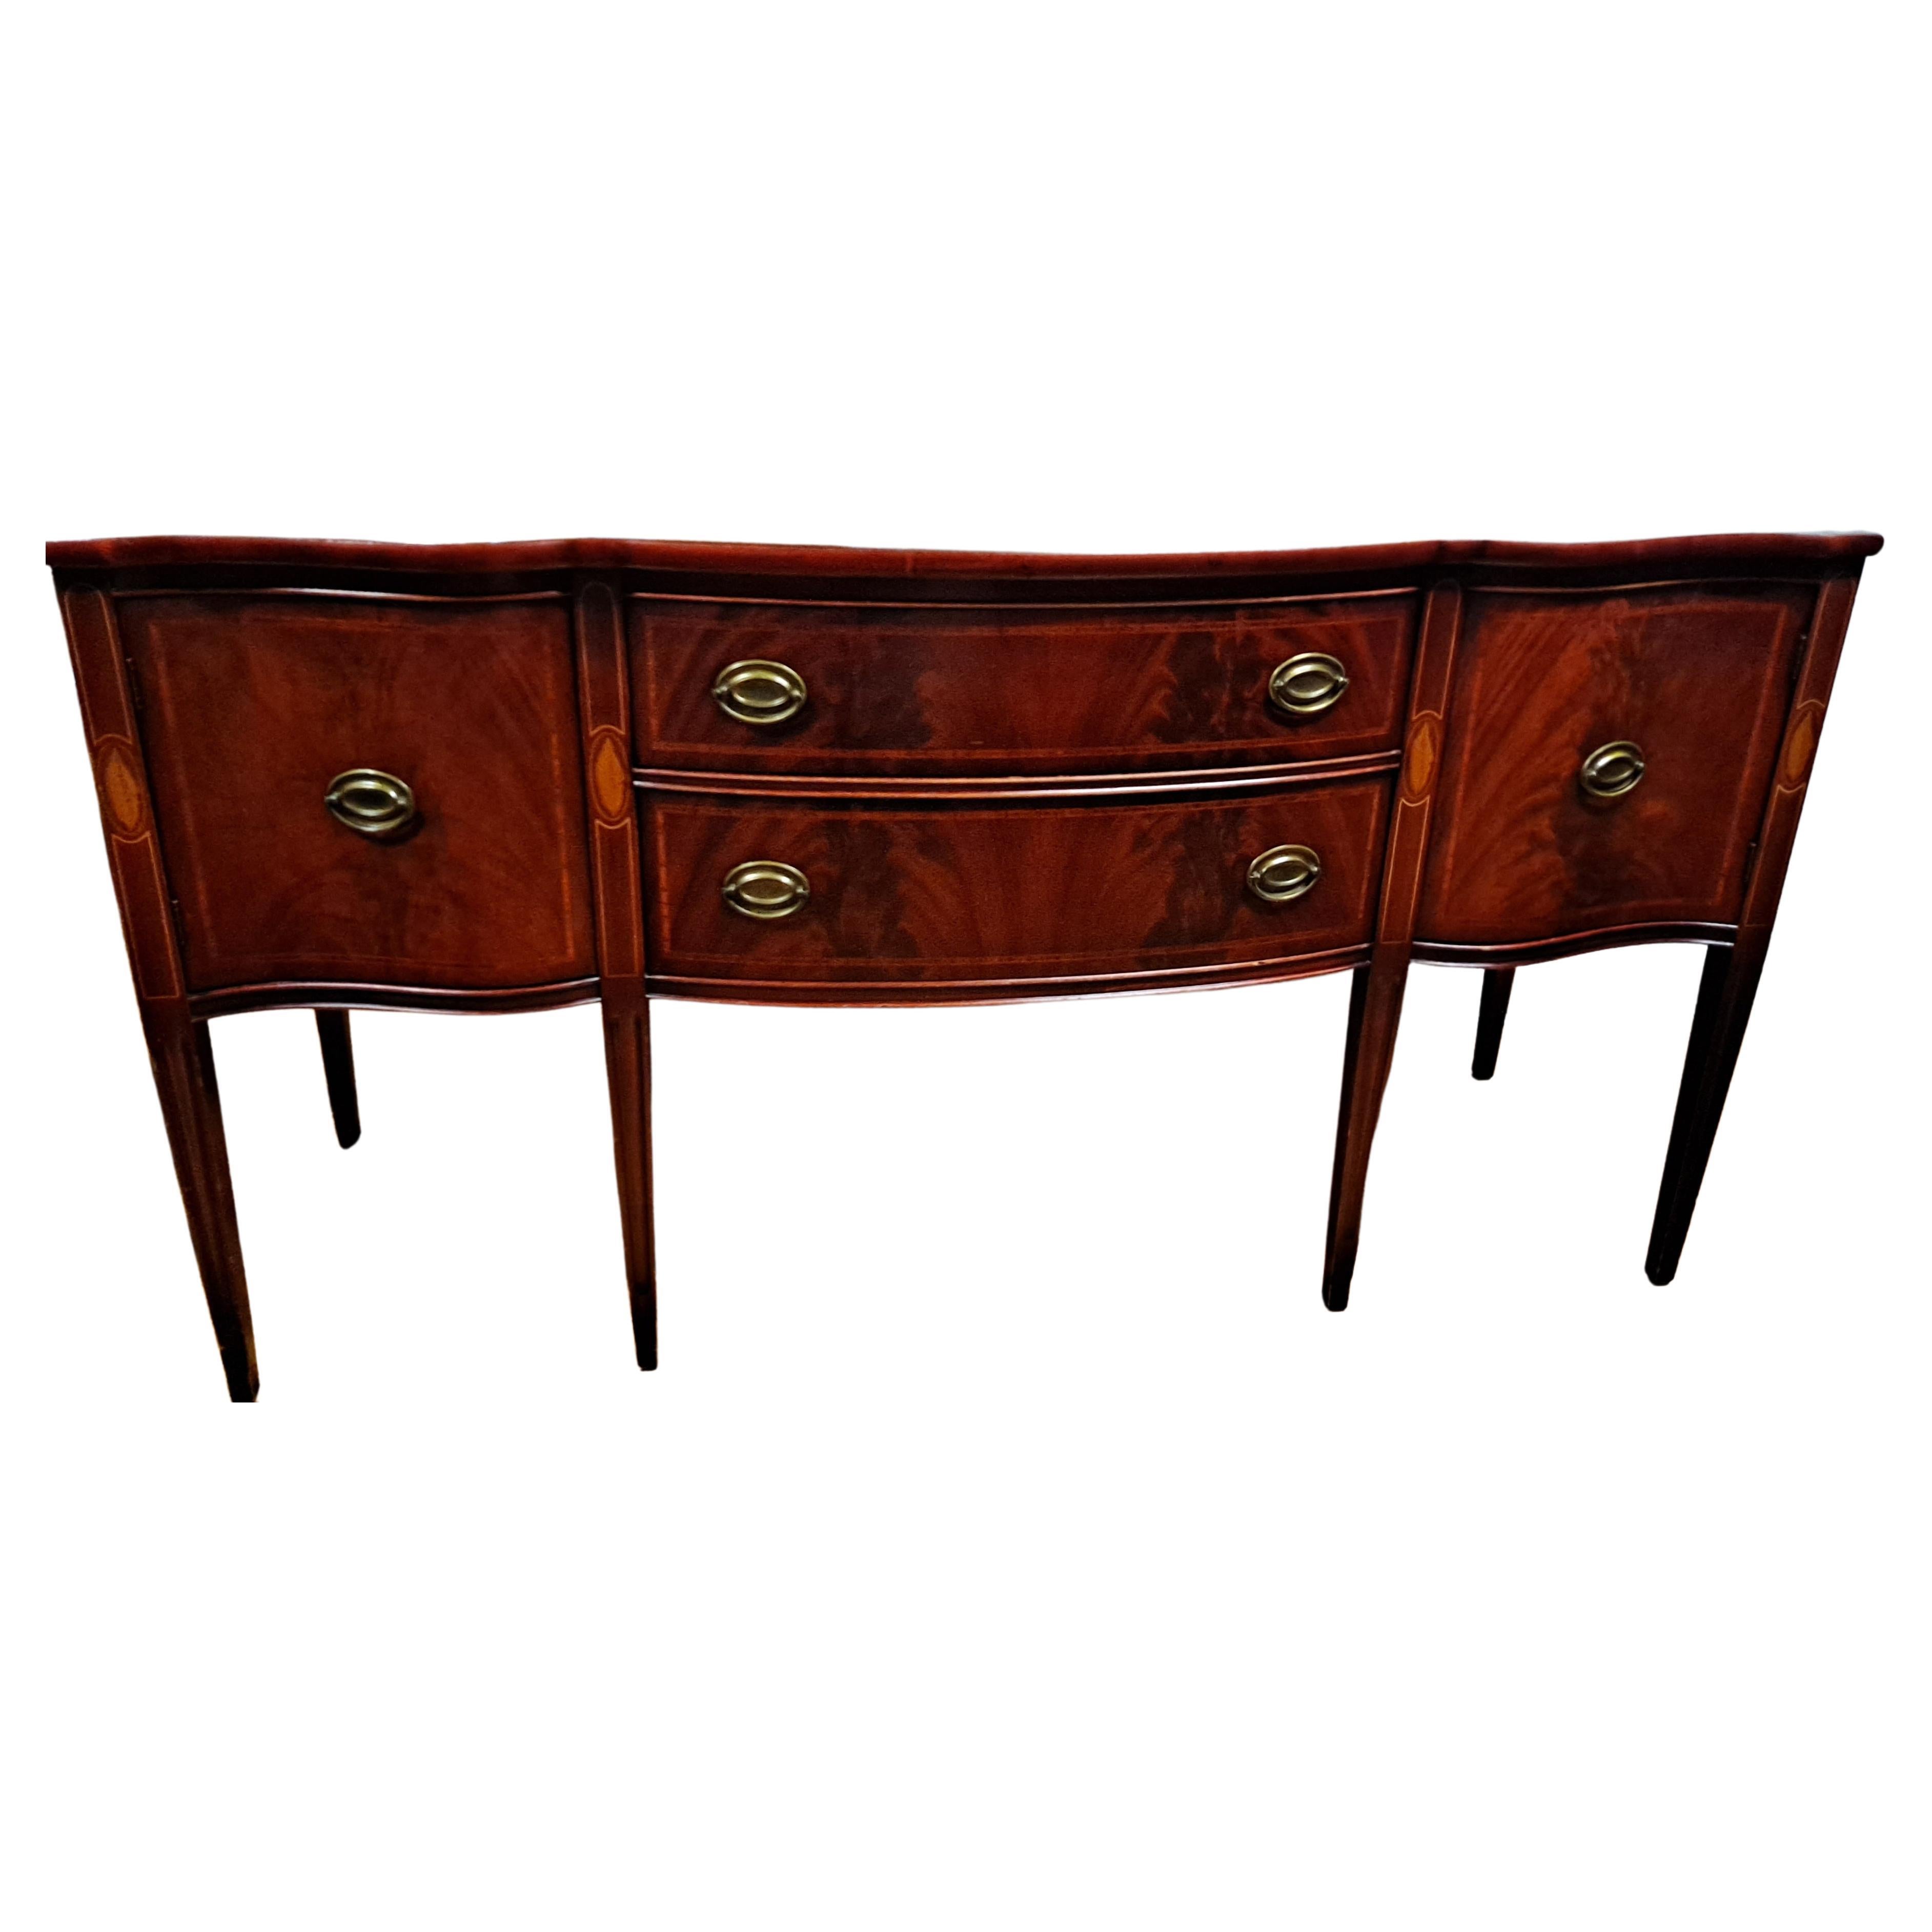 20th Century Federal Style Serpentine Front Mahogany Sideboard For Sale